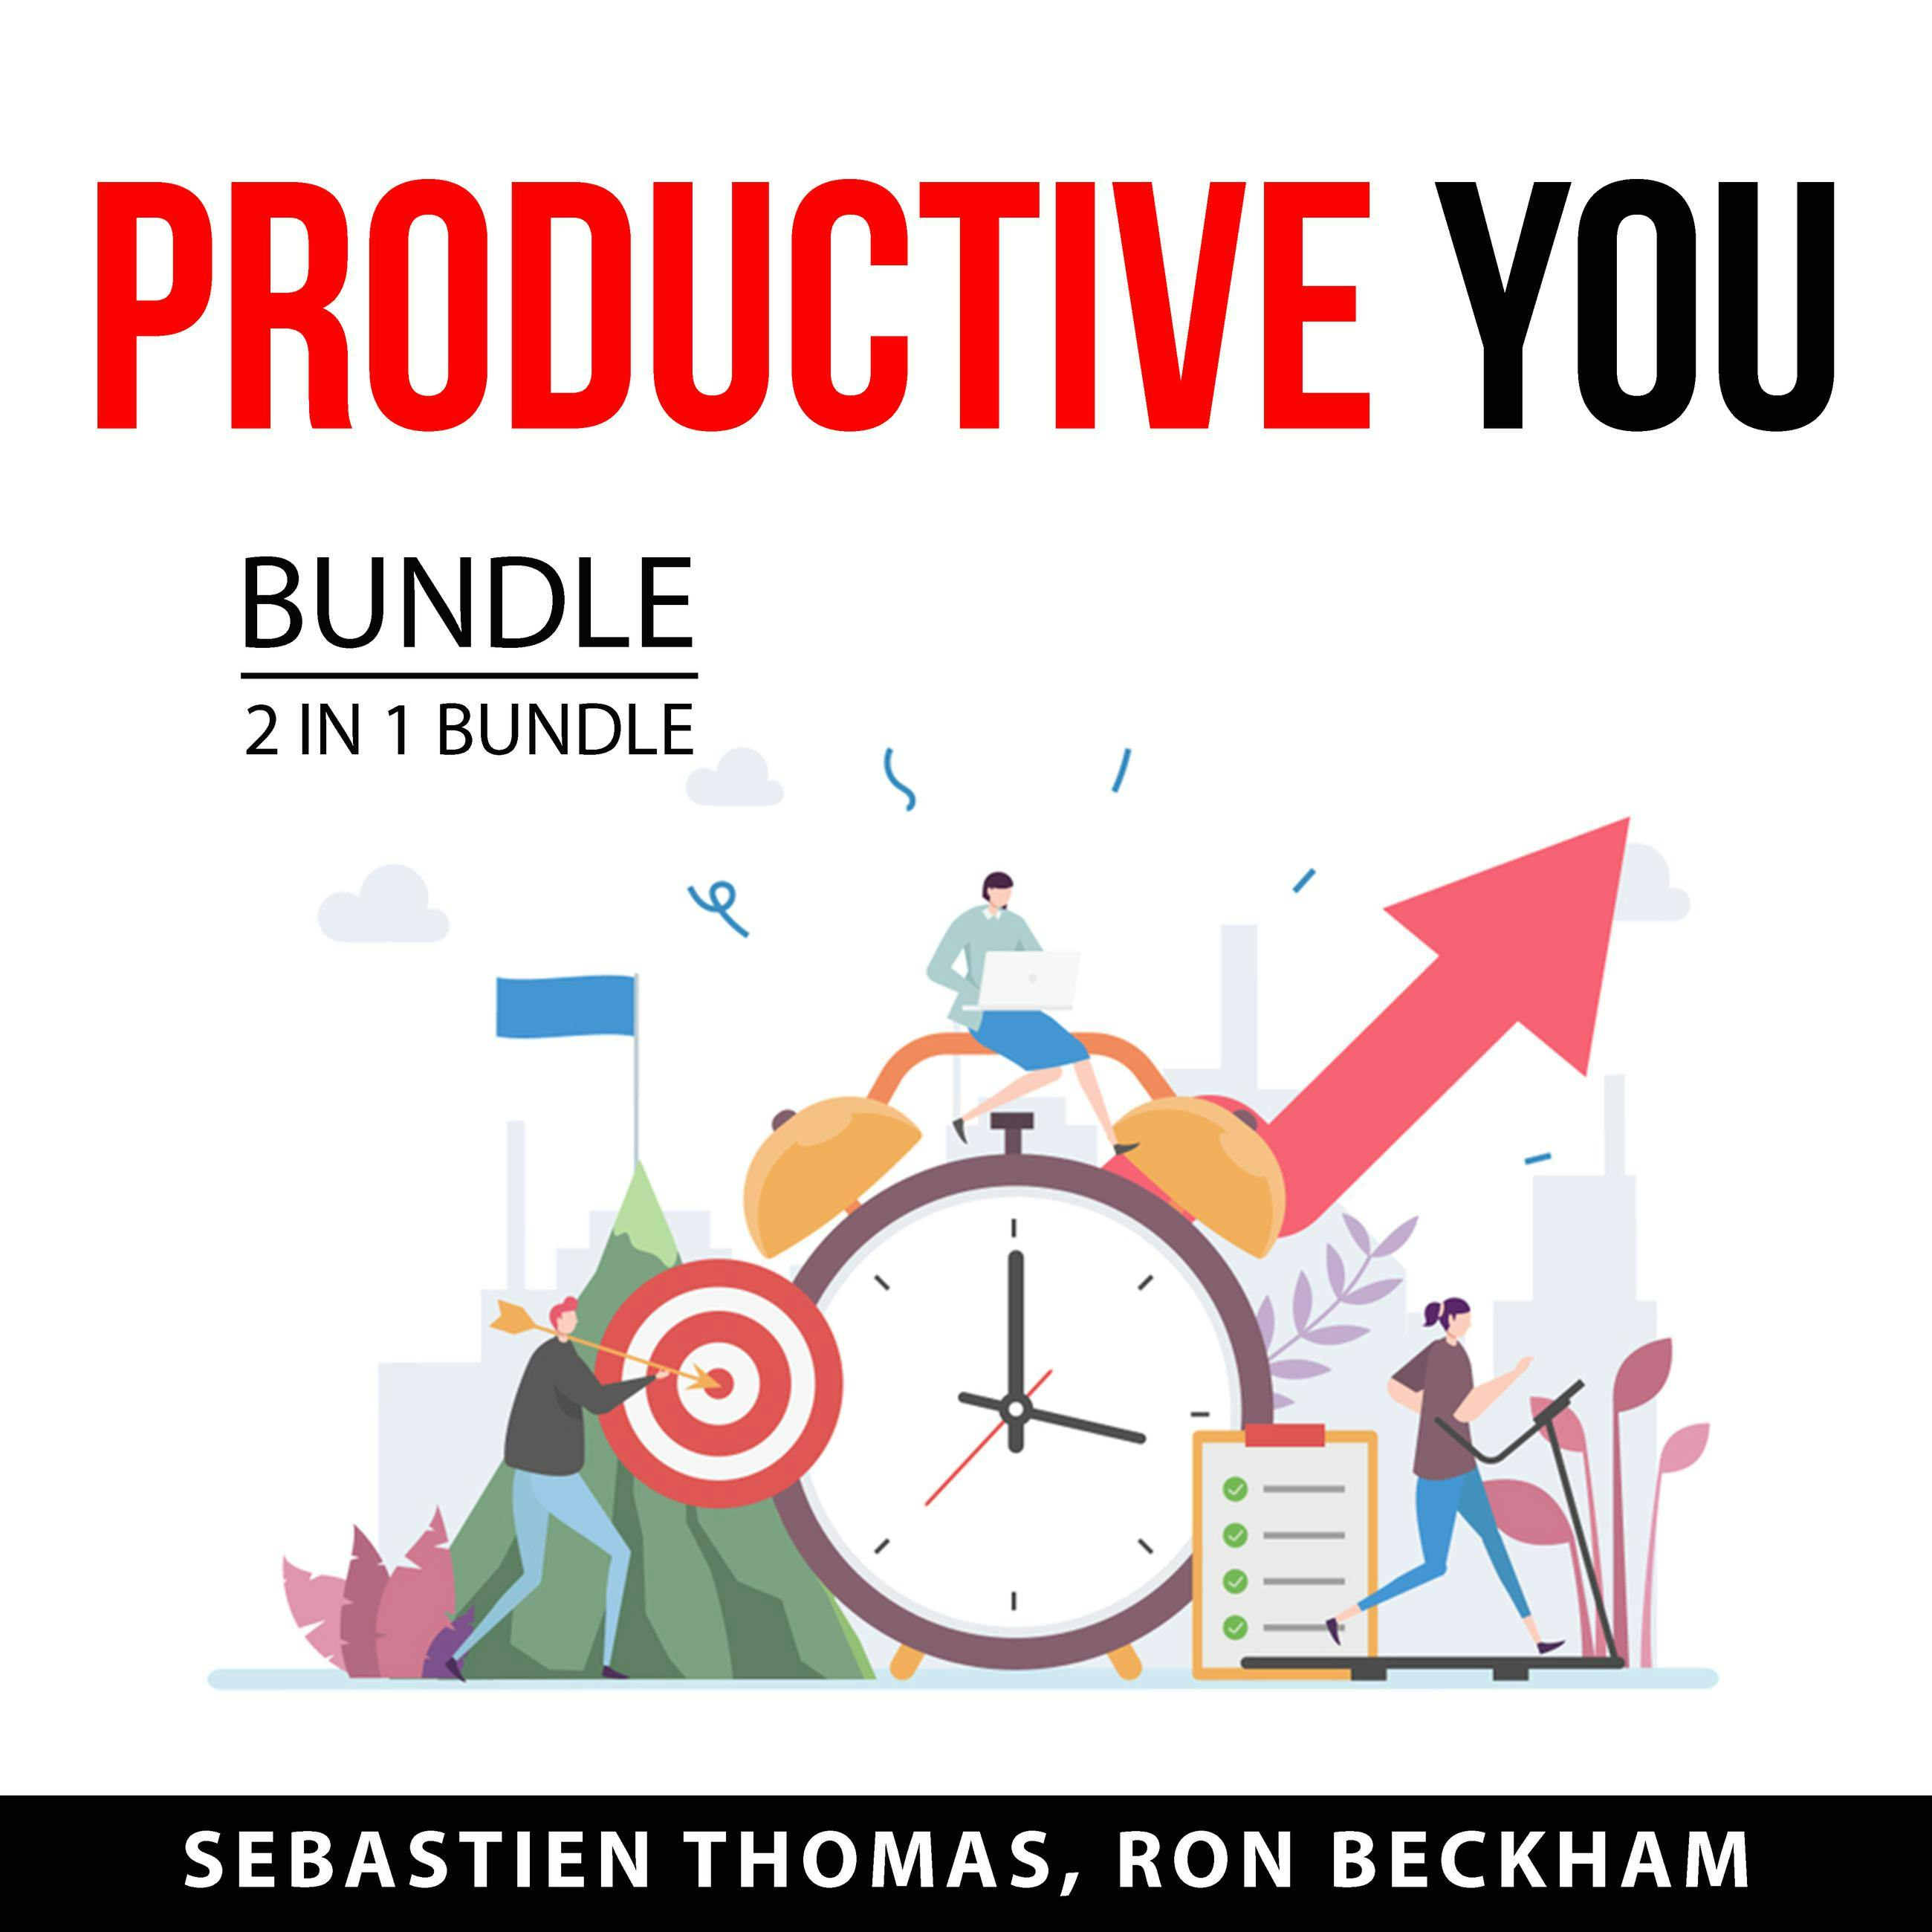 Productive You Bundle, 2 in 1 Bundle: Make the Most of Your Time and Procrastination Fix - undefined